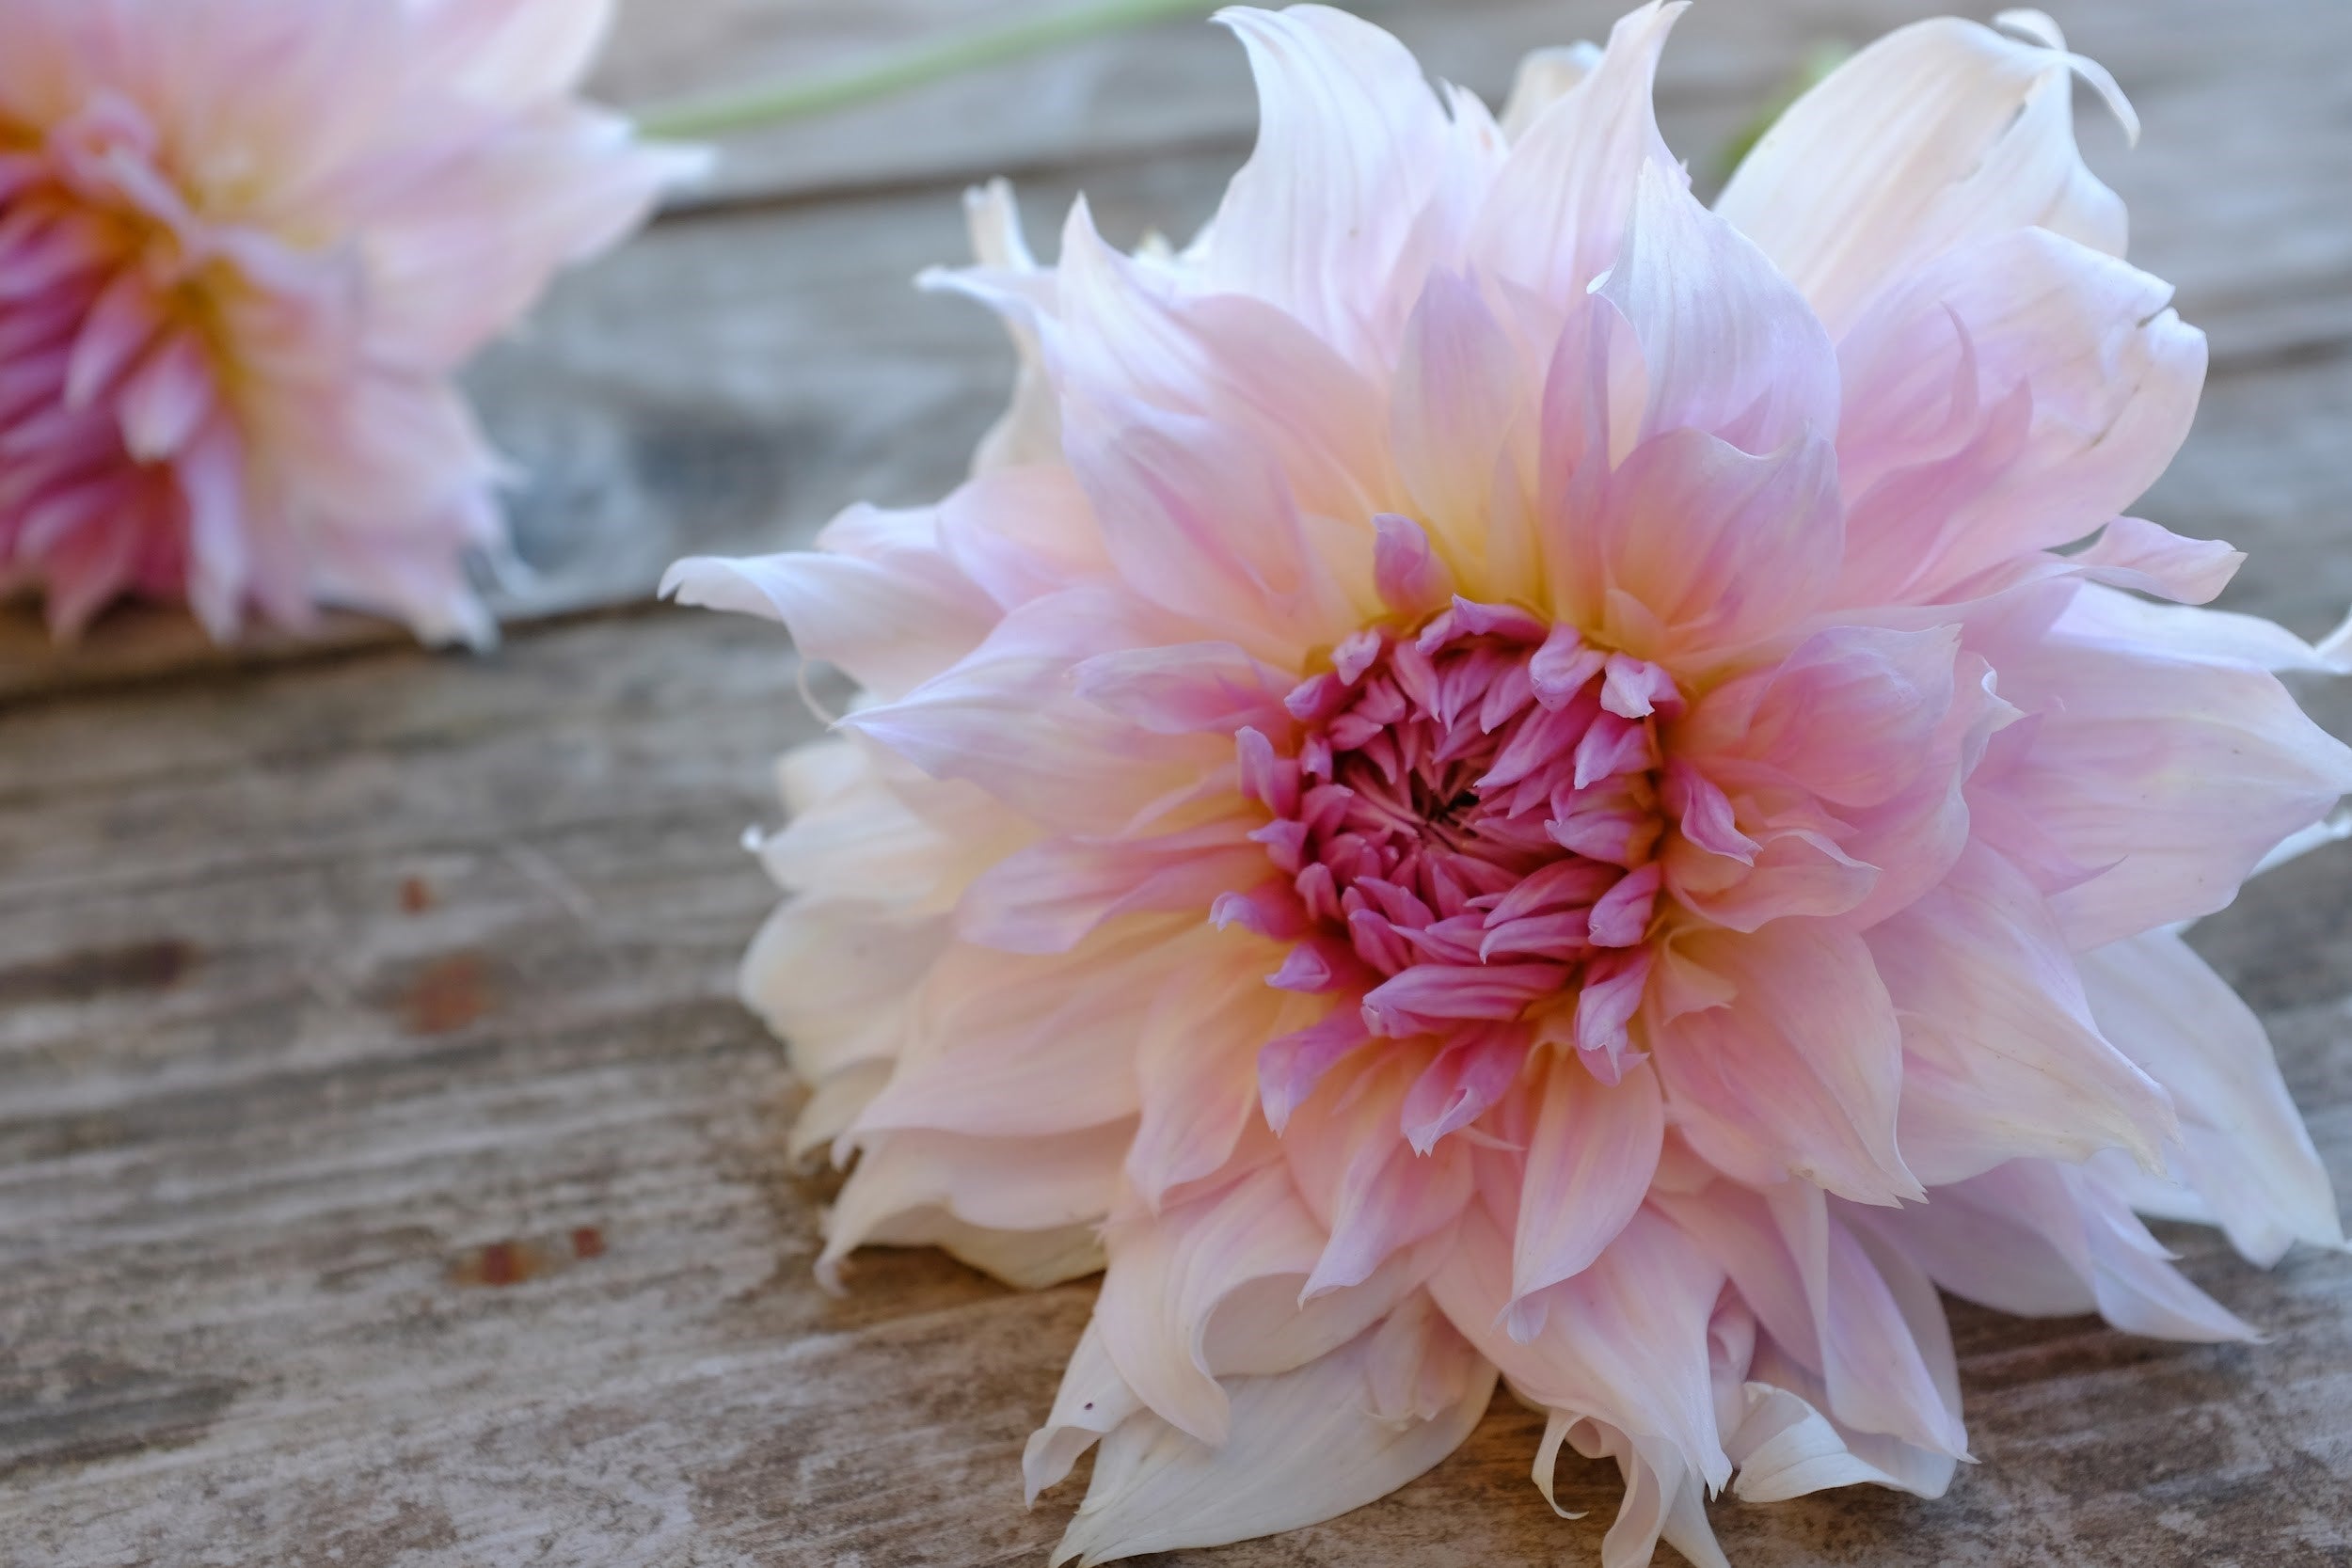 Blush pink and lavender Dahlia Tubers